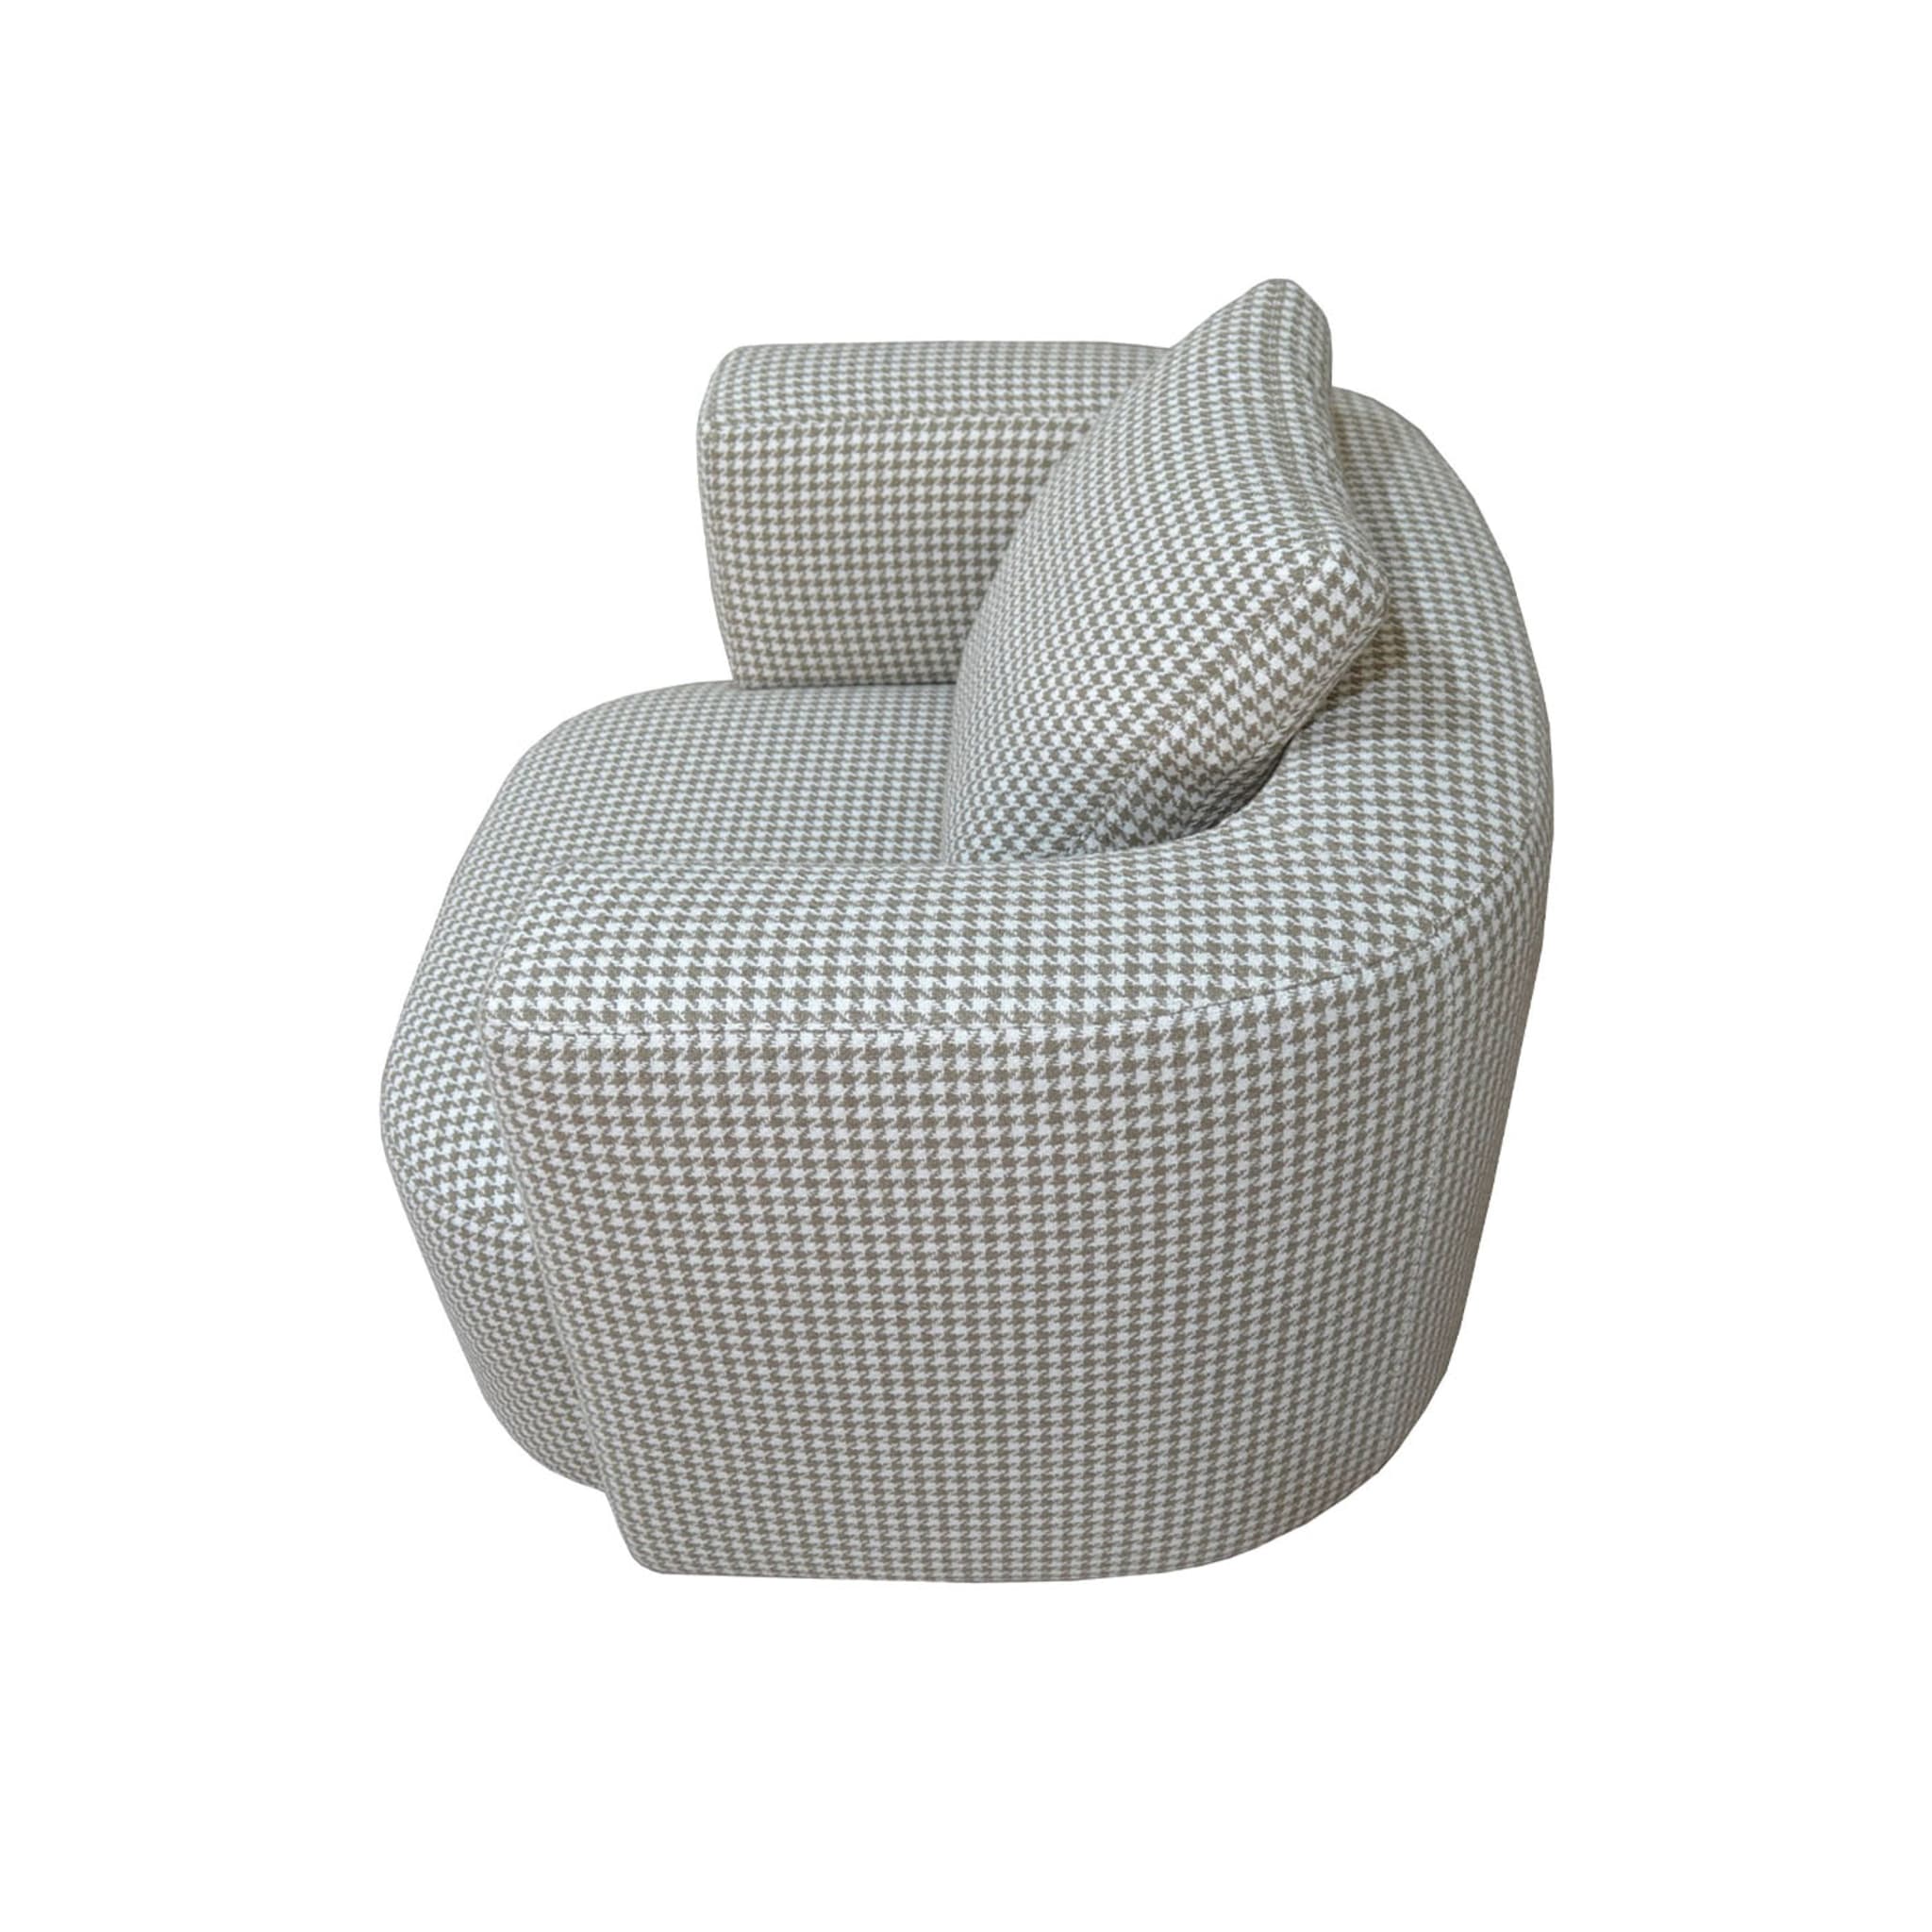  Italian Contemporary Lounge Upholstered Armchair  - Alternative view 1